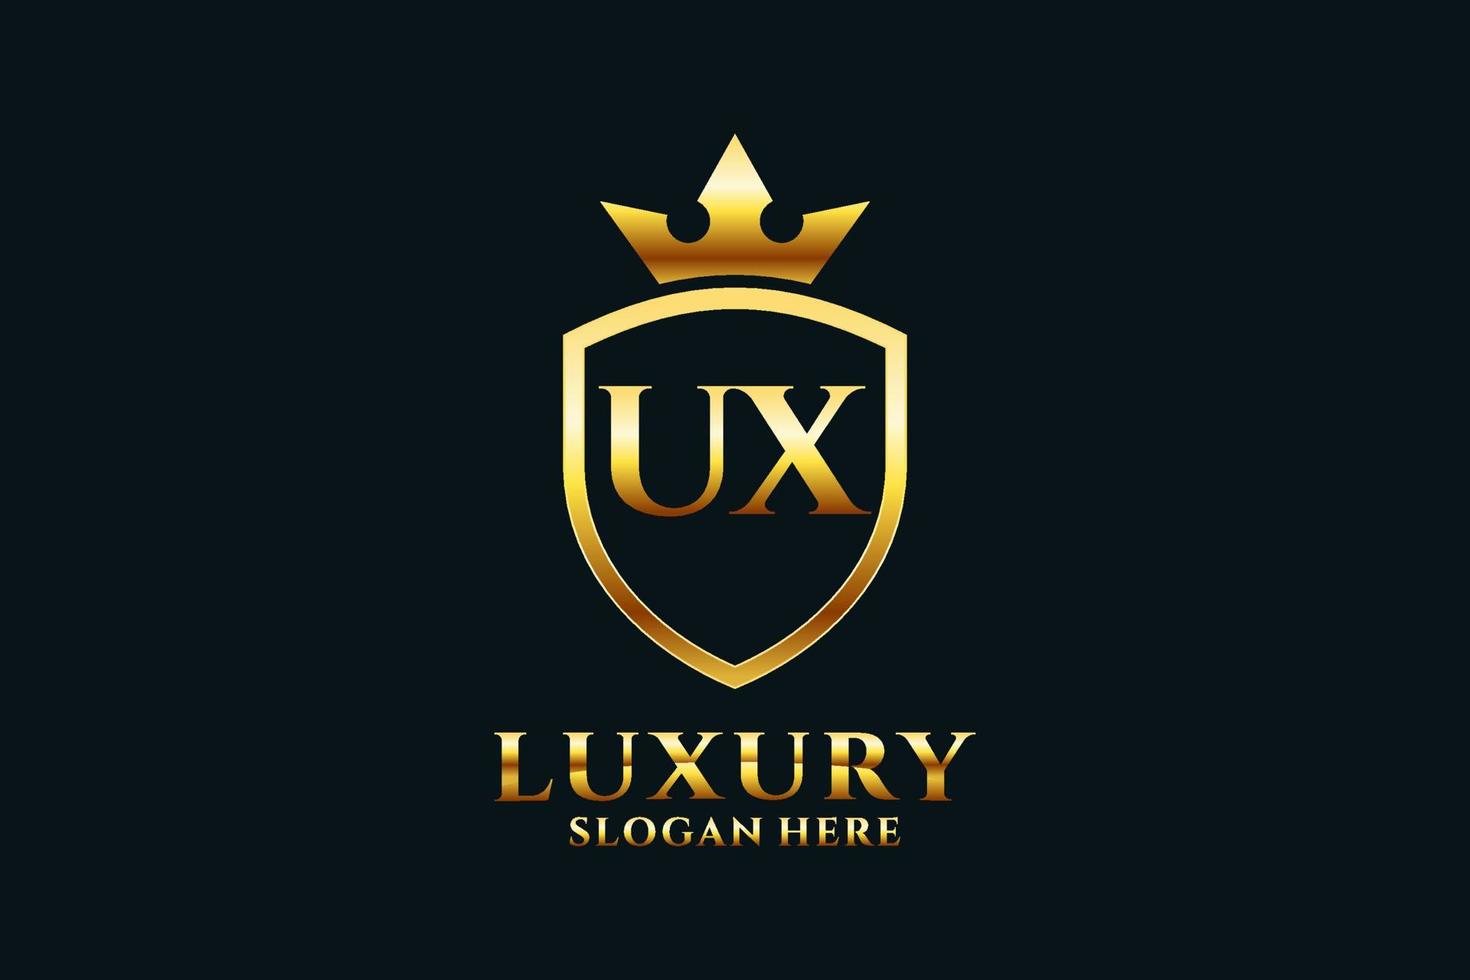 initial UX elegant luxury monogram logo or badge template with scrolls and royal crown - perfect for luxurious branding projects vector